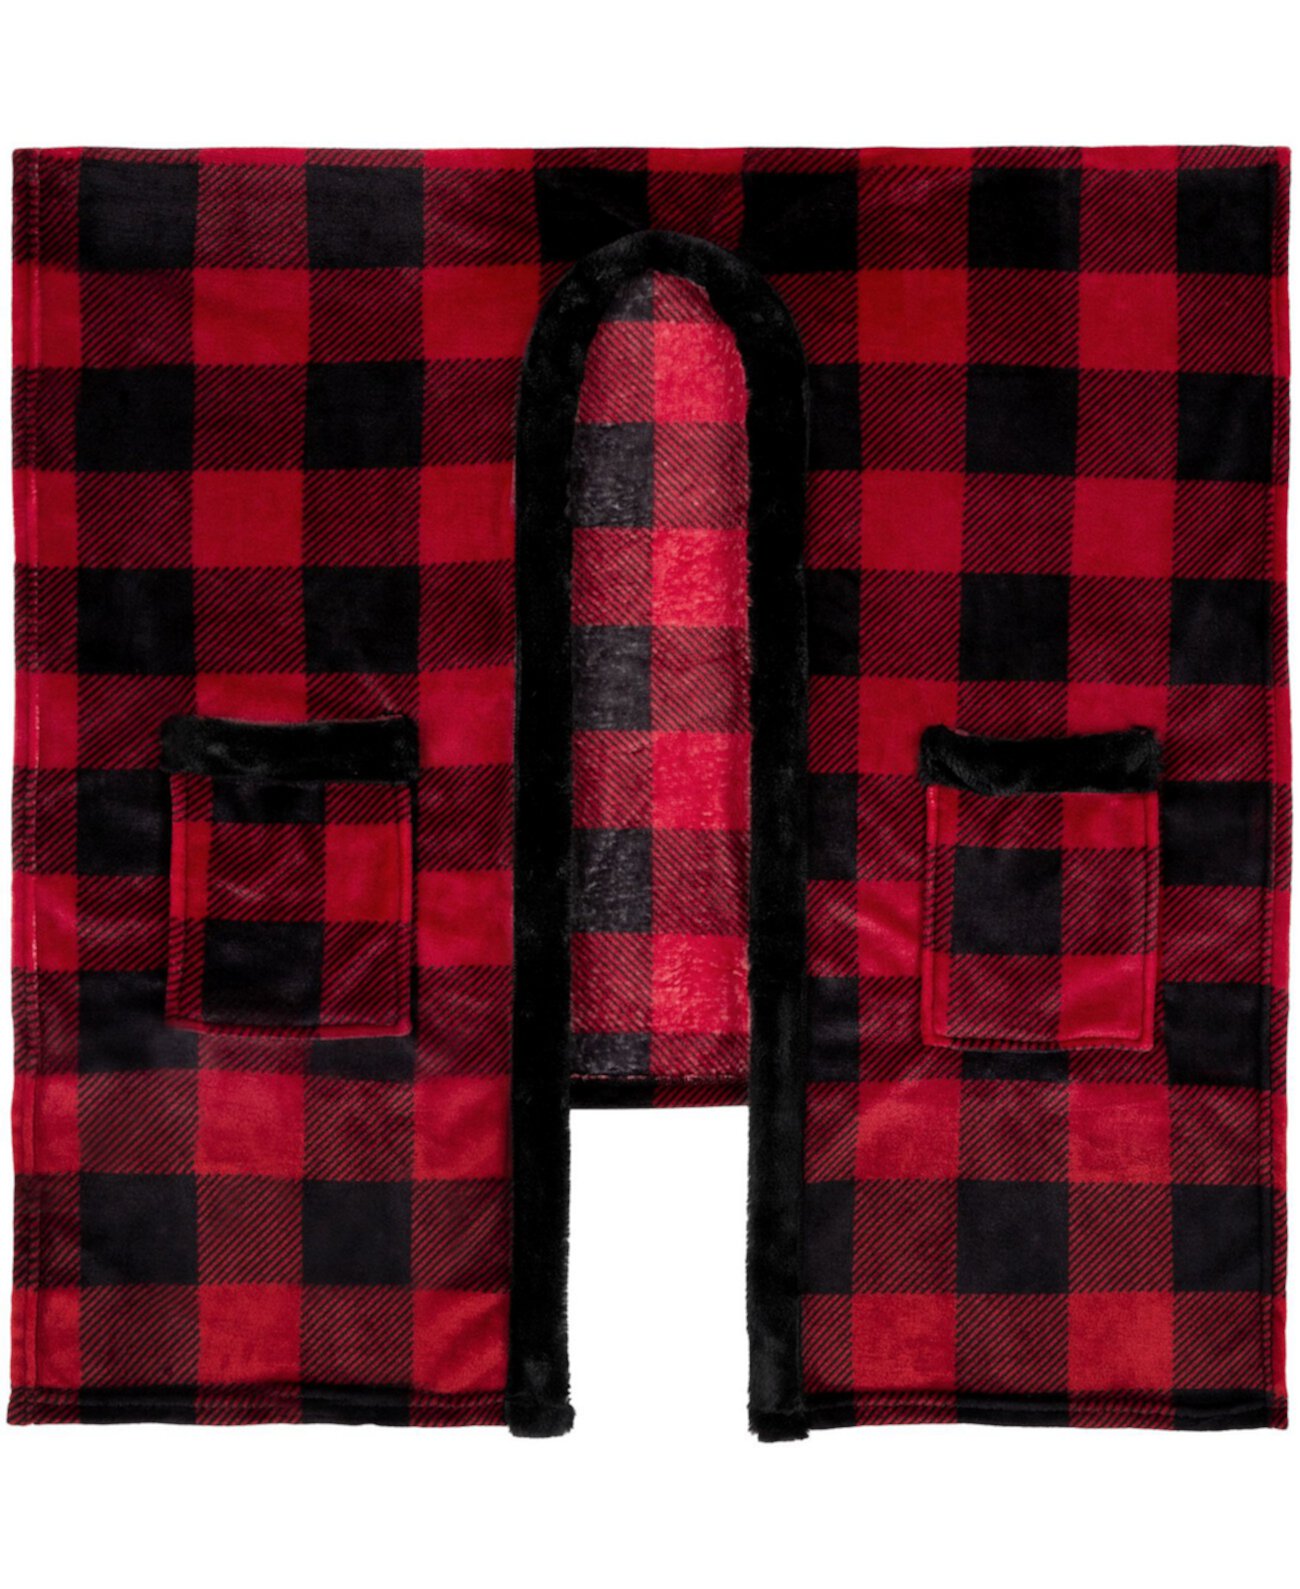 Inc Knit Tranquility Plaid Throw Safdie & Co.